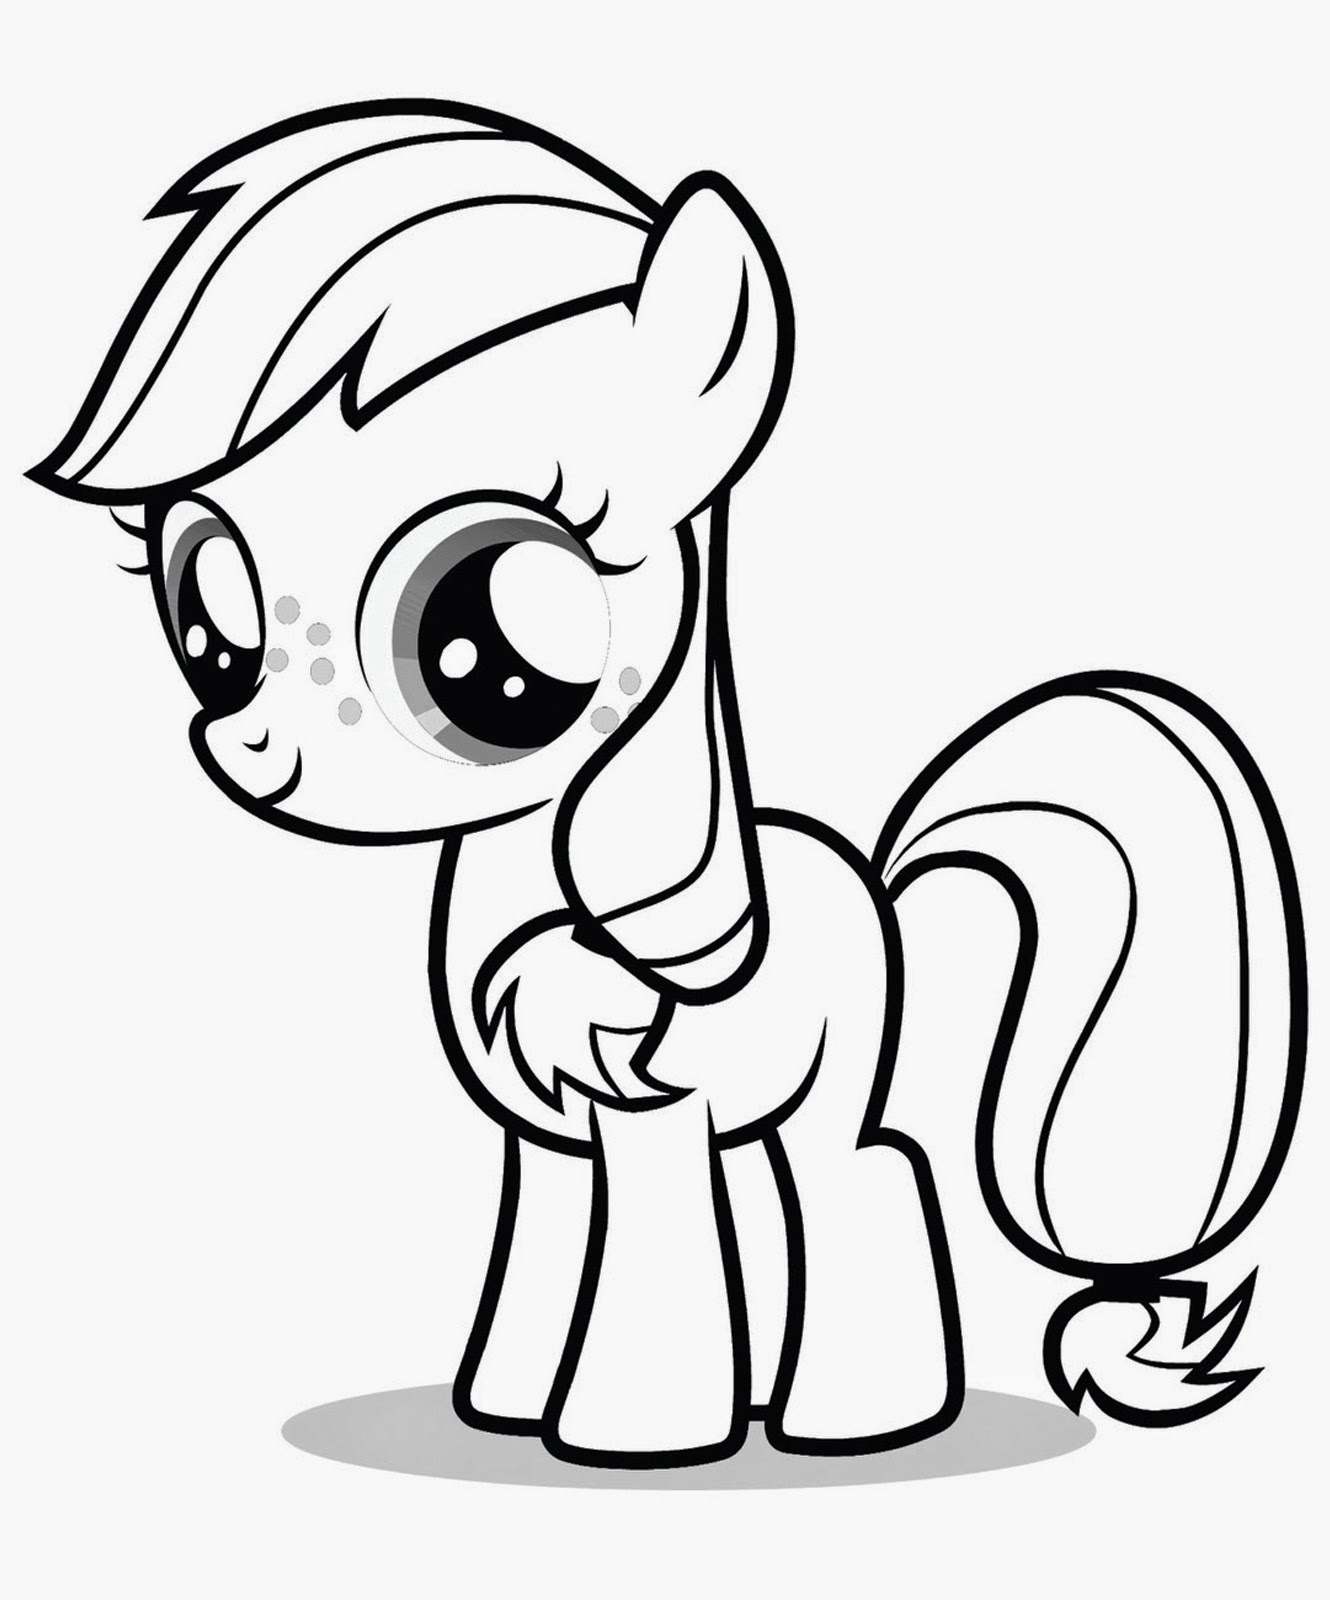 Coloring Pages: My Little Pony Coloring Pages Free and Printable